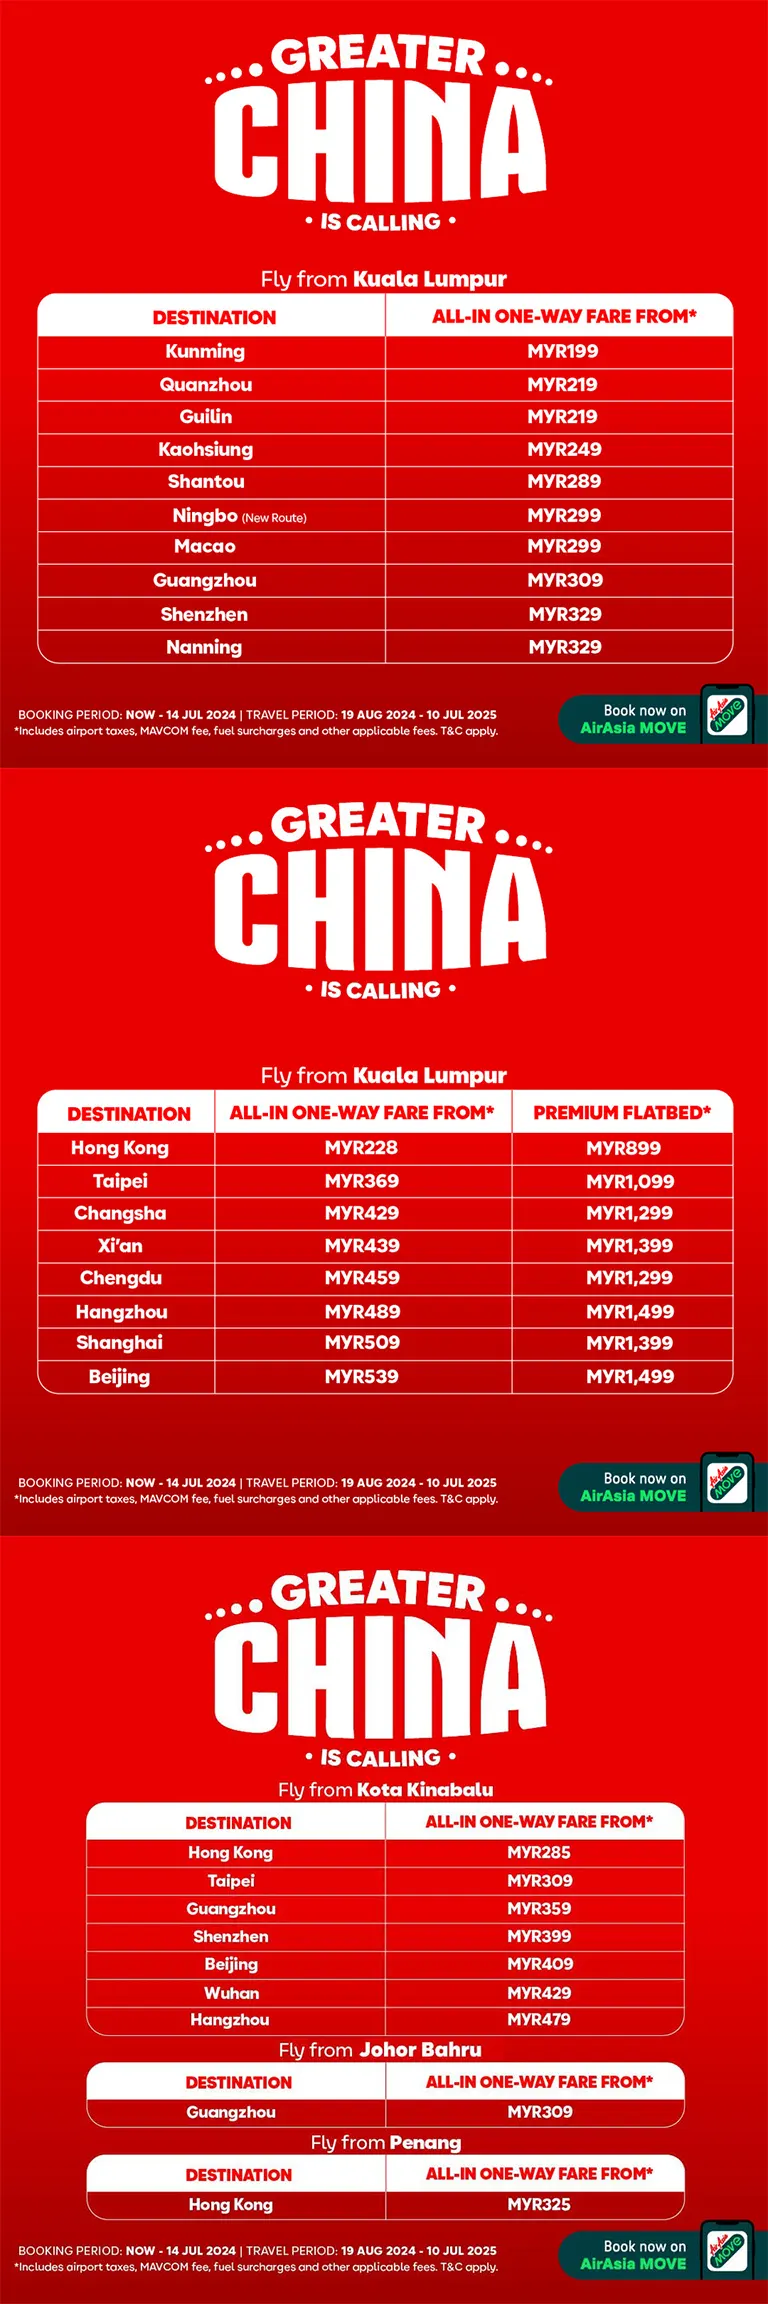 Greater China is calling!